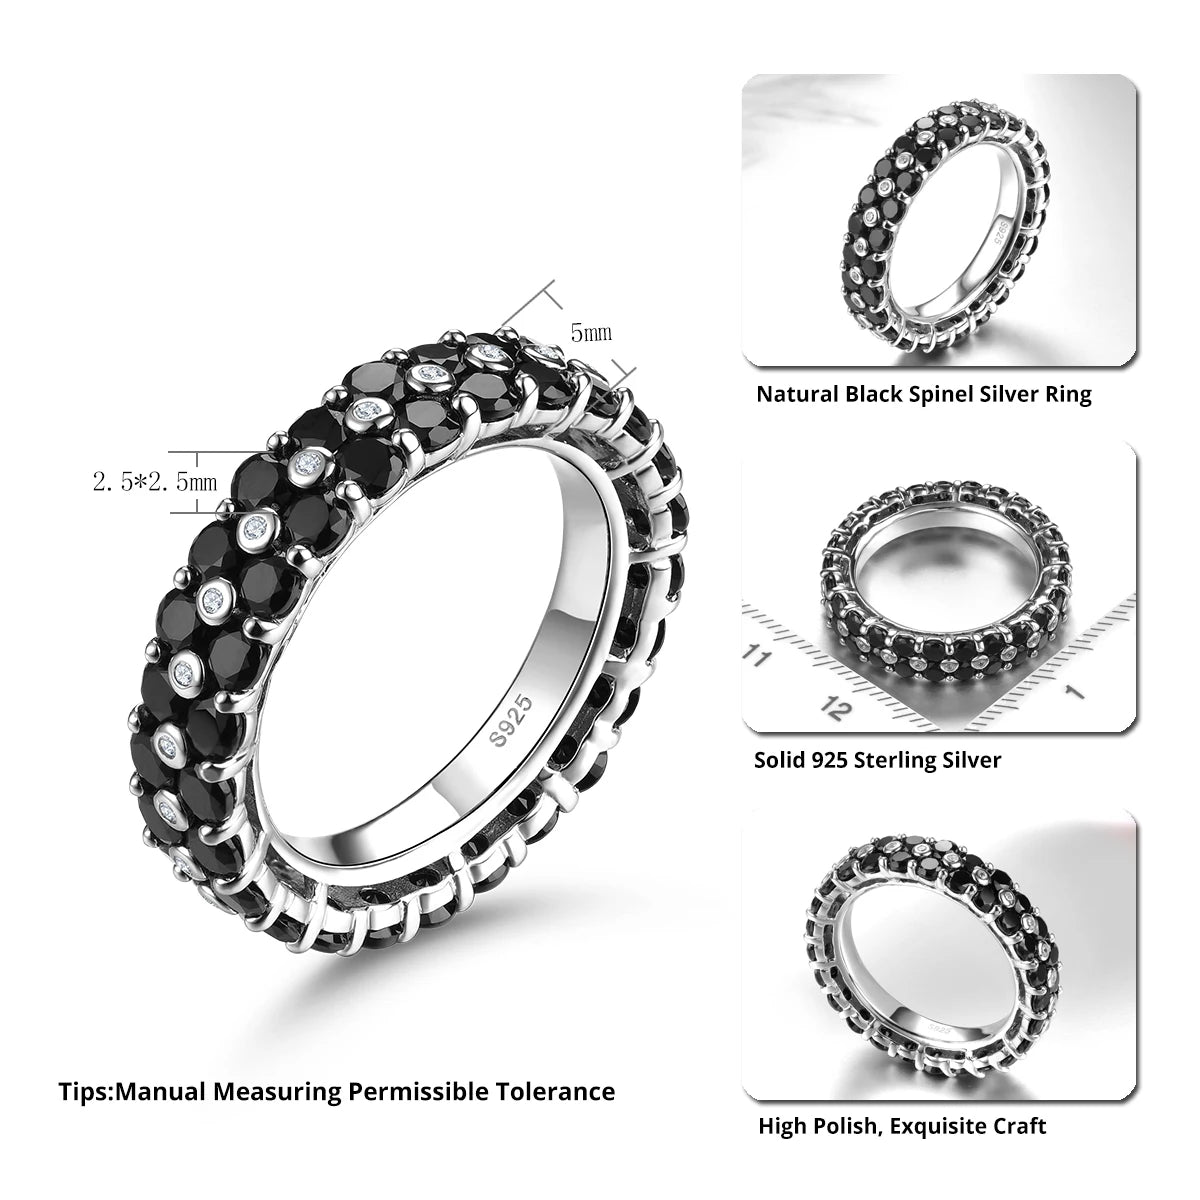 Natural Black Spinel Silver Rings 5.5 Carats Genuine Spinel Classic Fine Jewelry Unisex Style S925 Band Gifts for Birthday